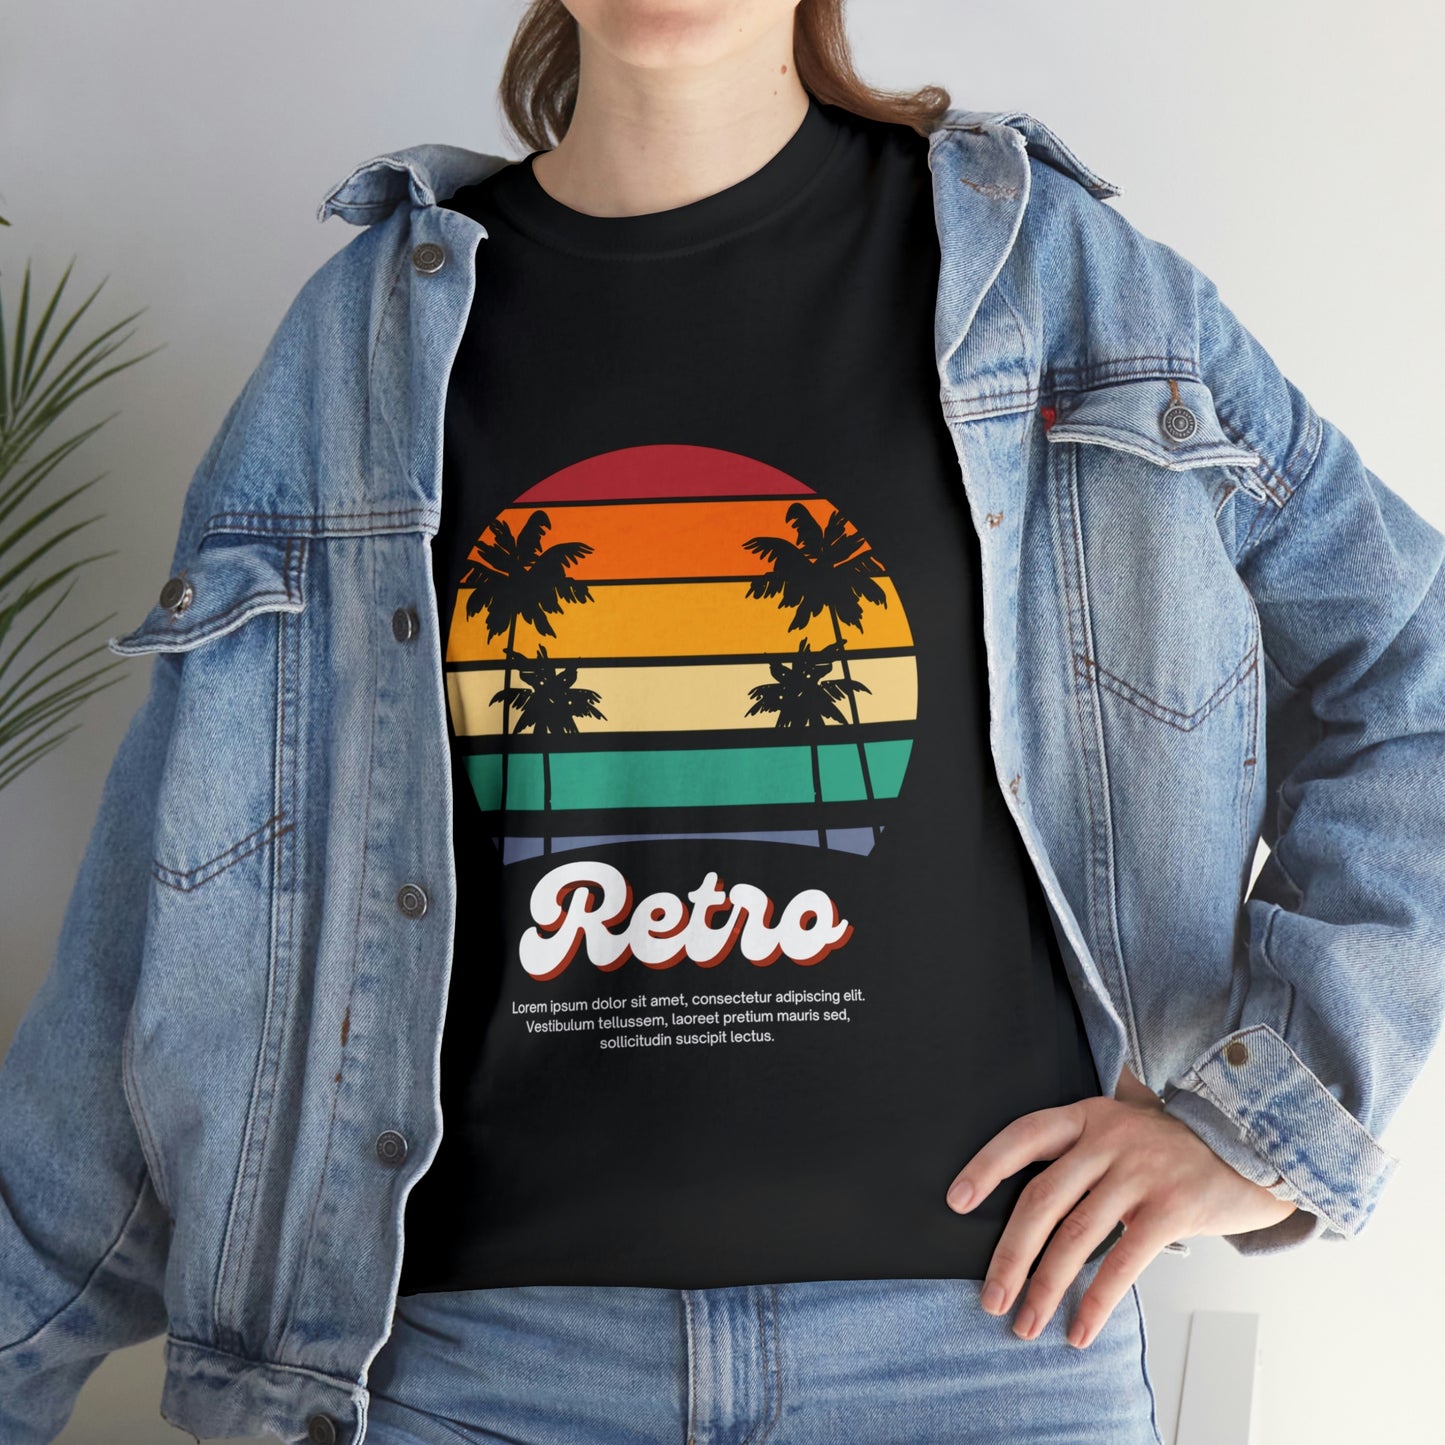 Retro Your Style  Our Custom Printed Tee Unique Design Comfortable Fit  Personalized for You.  color, funny tshirt tee shirt motivation